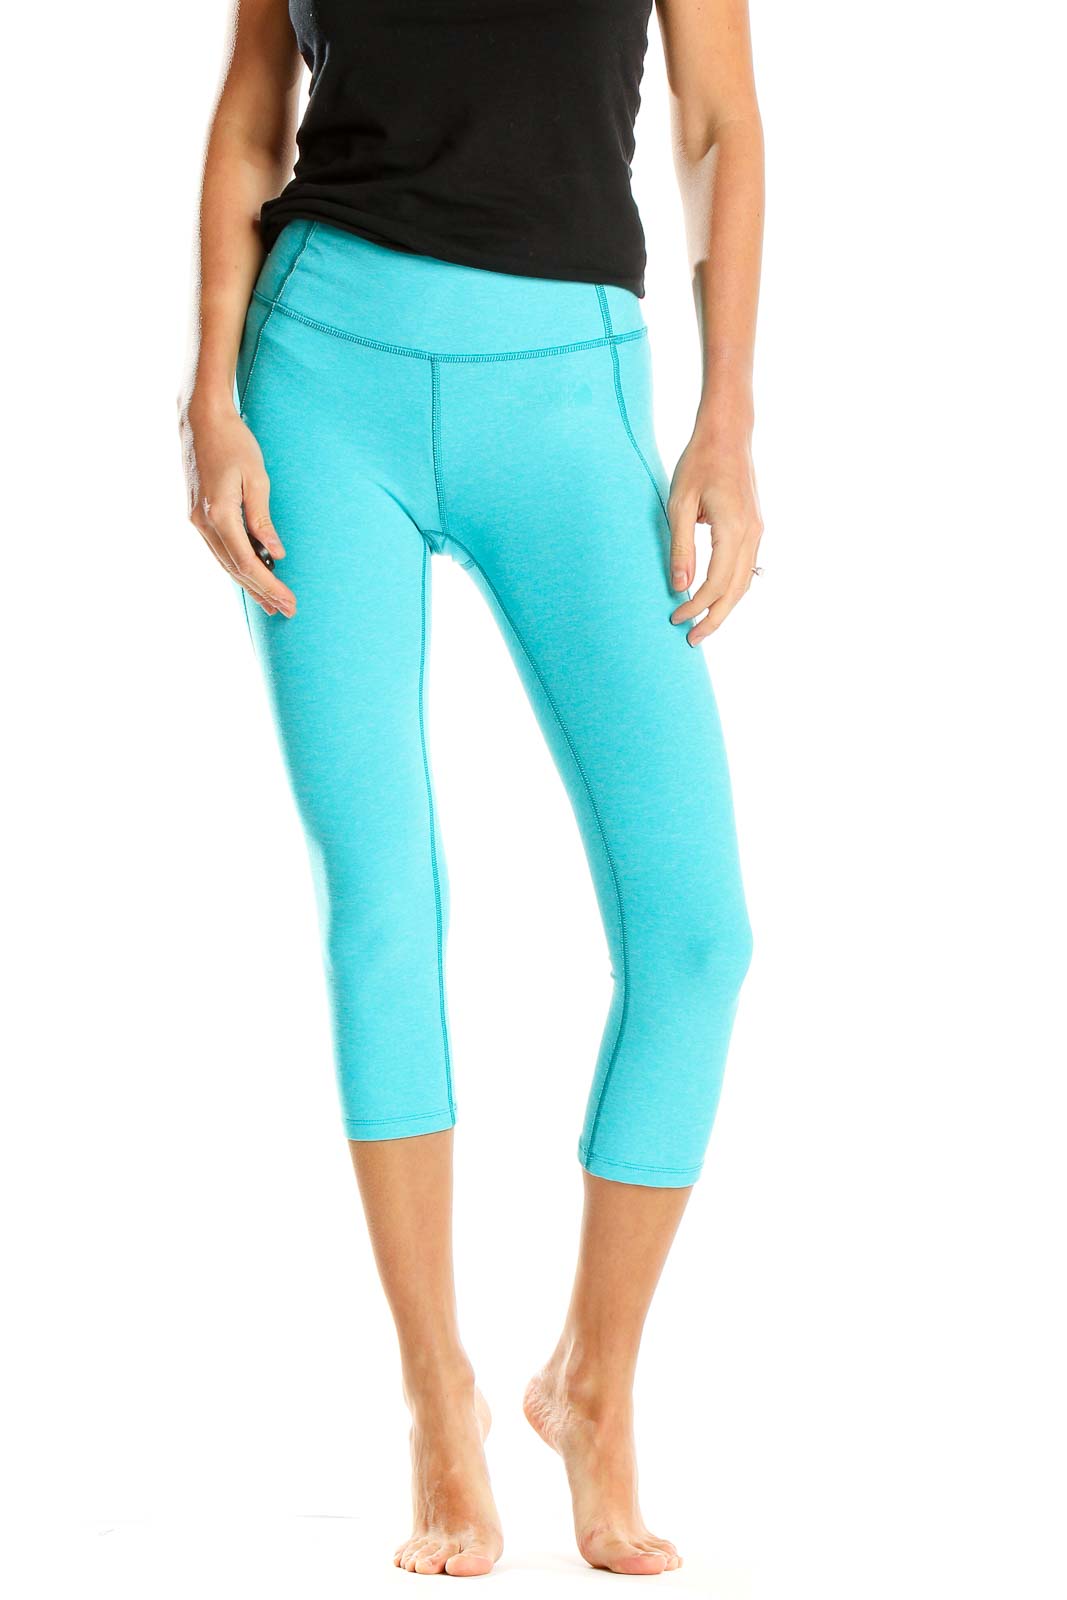 Blue Cropped Activewear Leggings Front